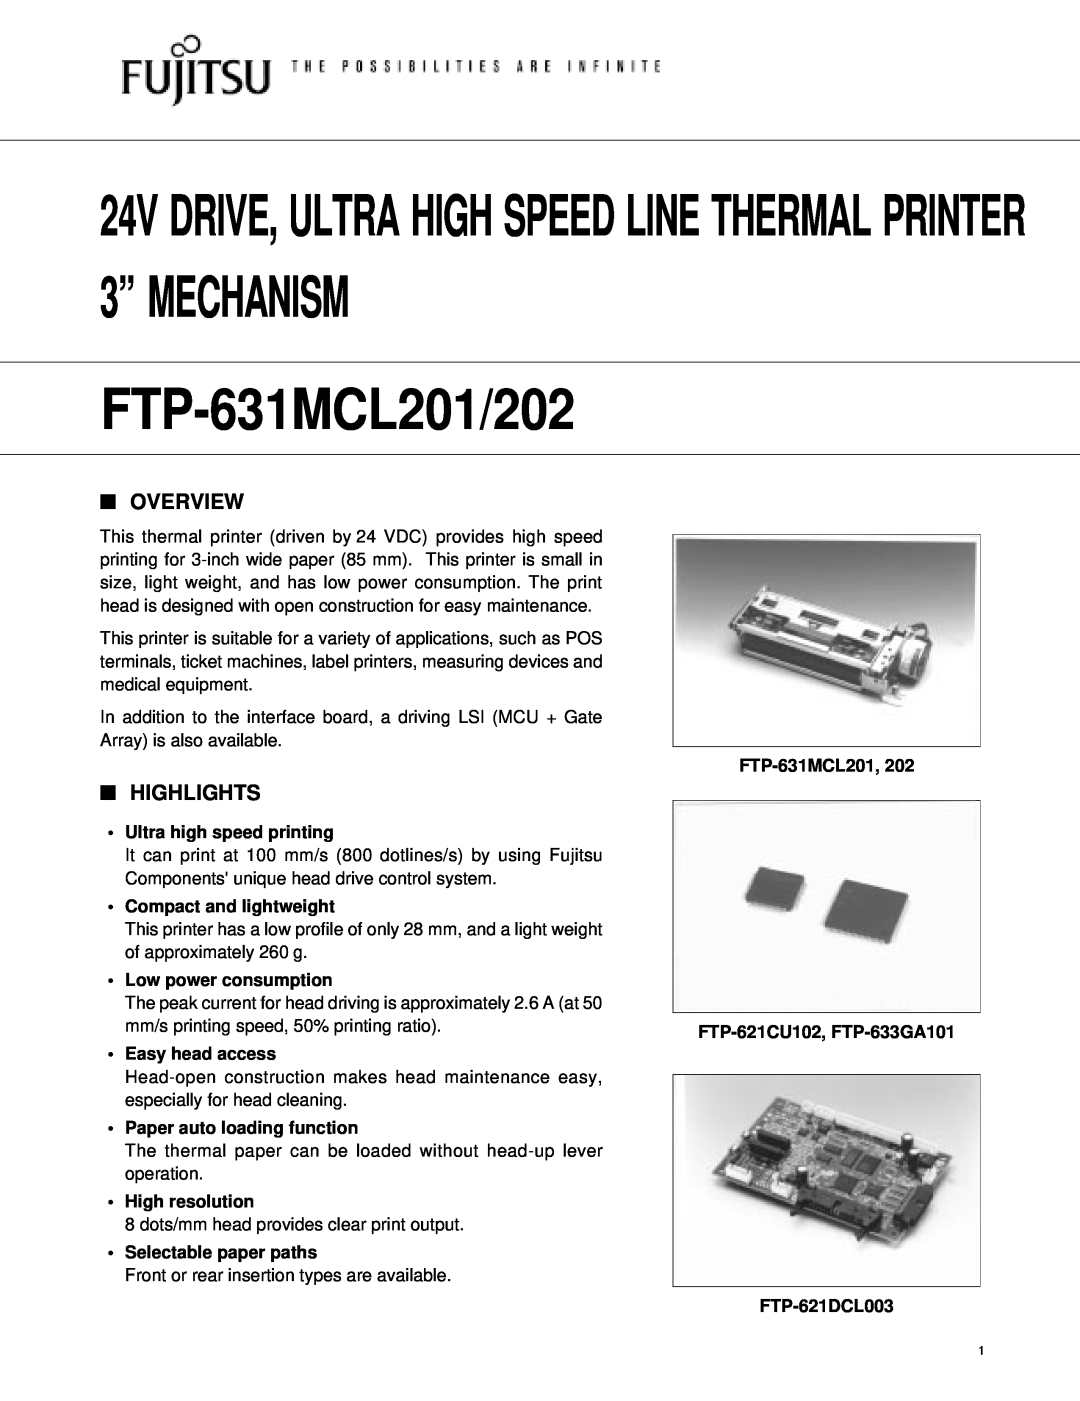 Fujitsu FTP-631MCL201 manual Overview, Highlights, Ultra high speed printing, Compact and lightweight, Easy head access 